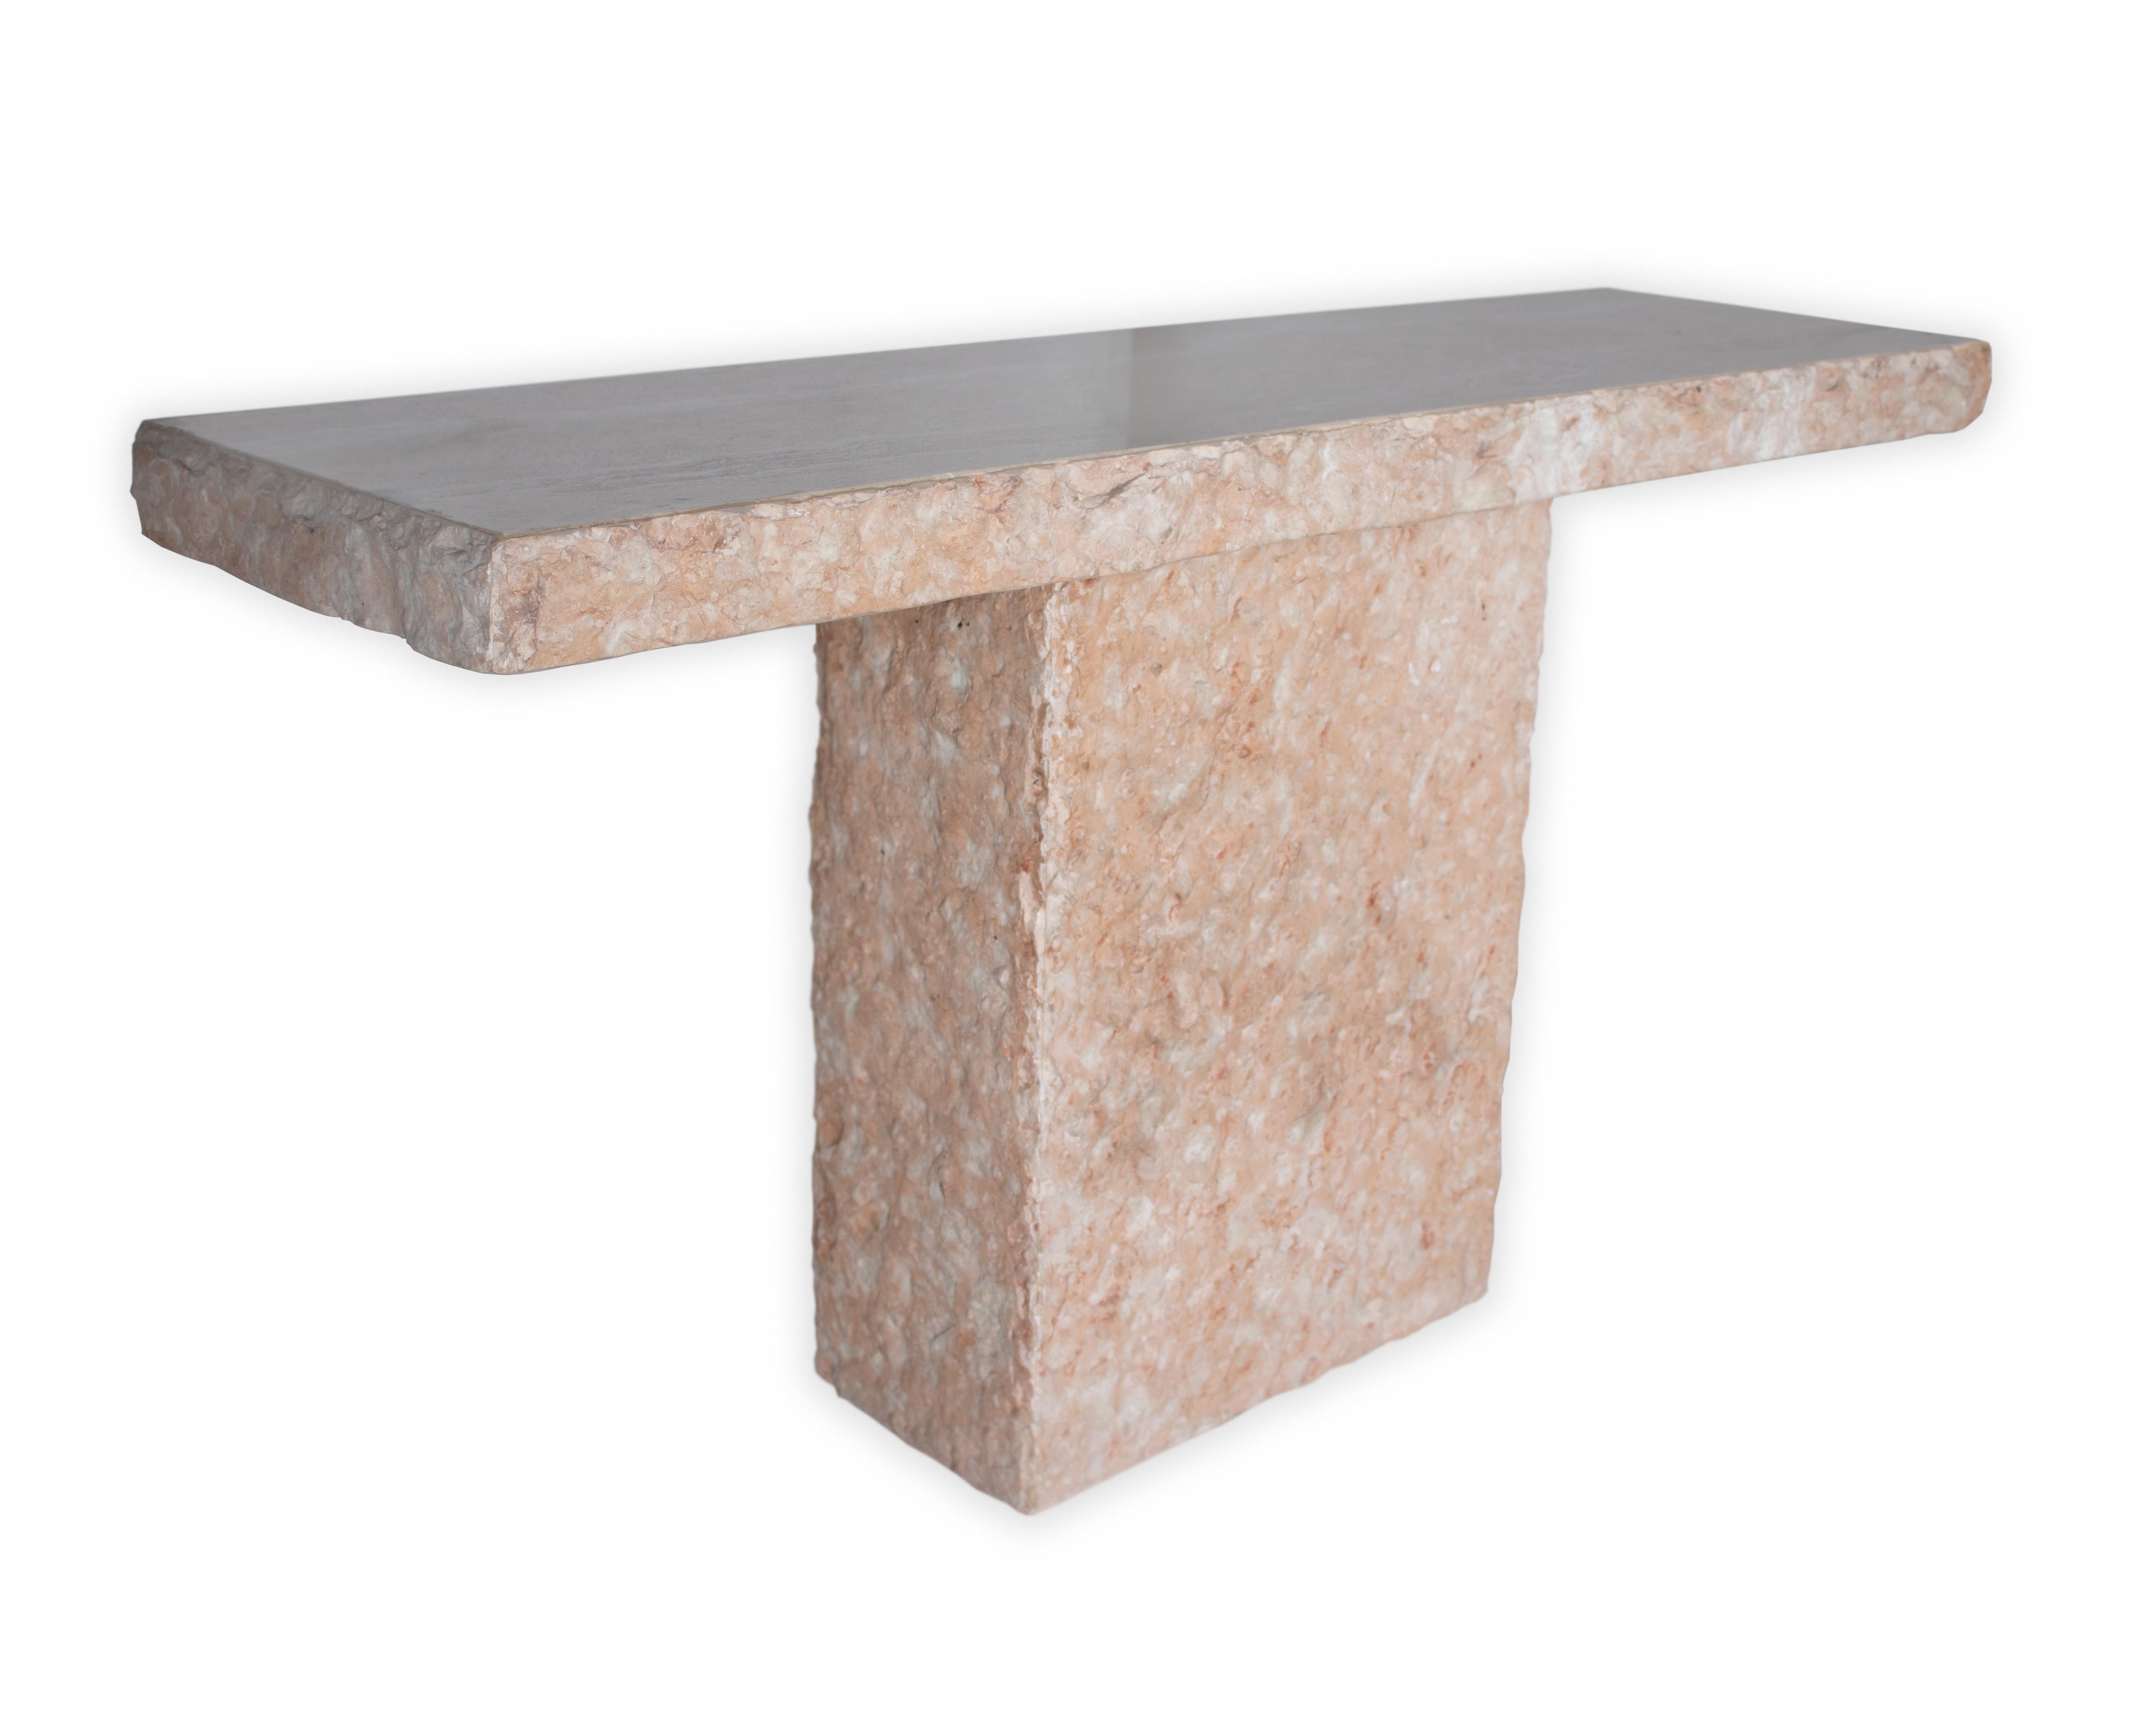 Travertine console table with chipped edge and base. In my organic, contemporary, vintage and mid-century modern style.

Part of our one of a kind Le Monde collection. Exclusive to Brendan Bass.